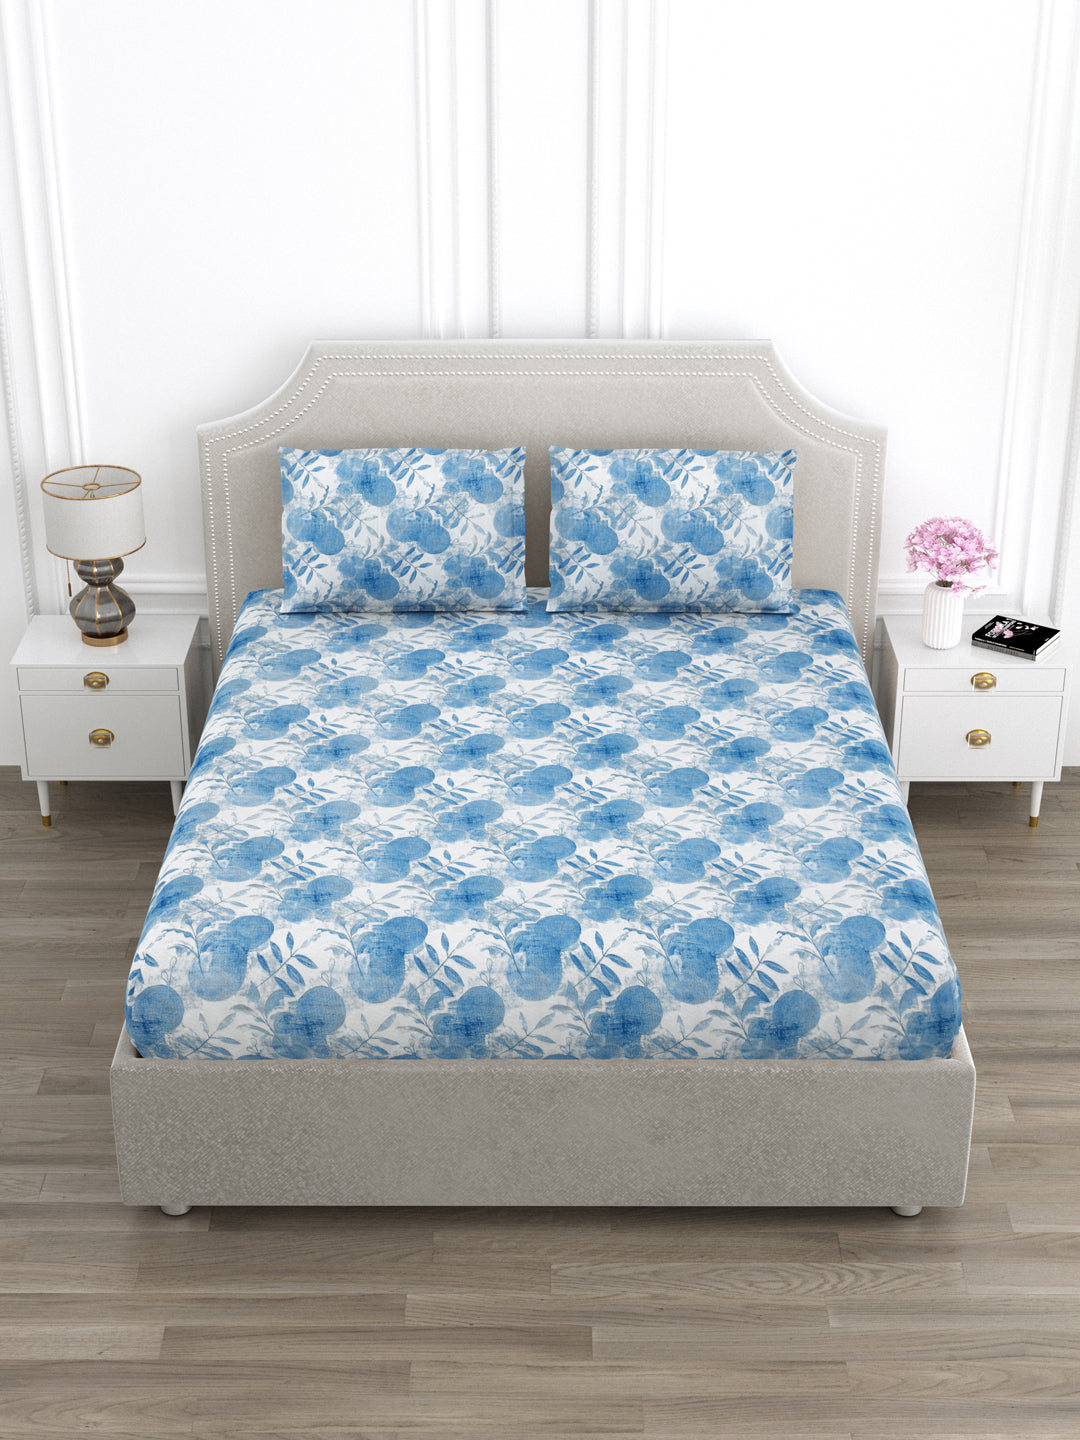 White & Blue Abstract Print King Size Bed Cotton Linen